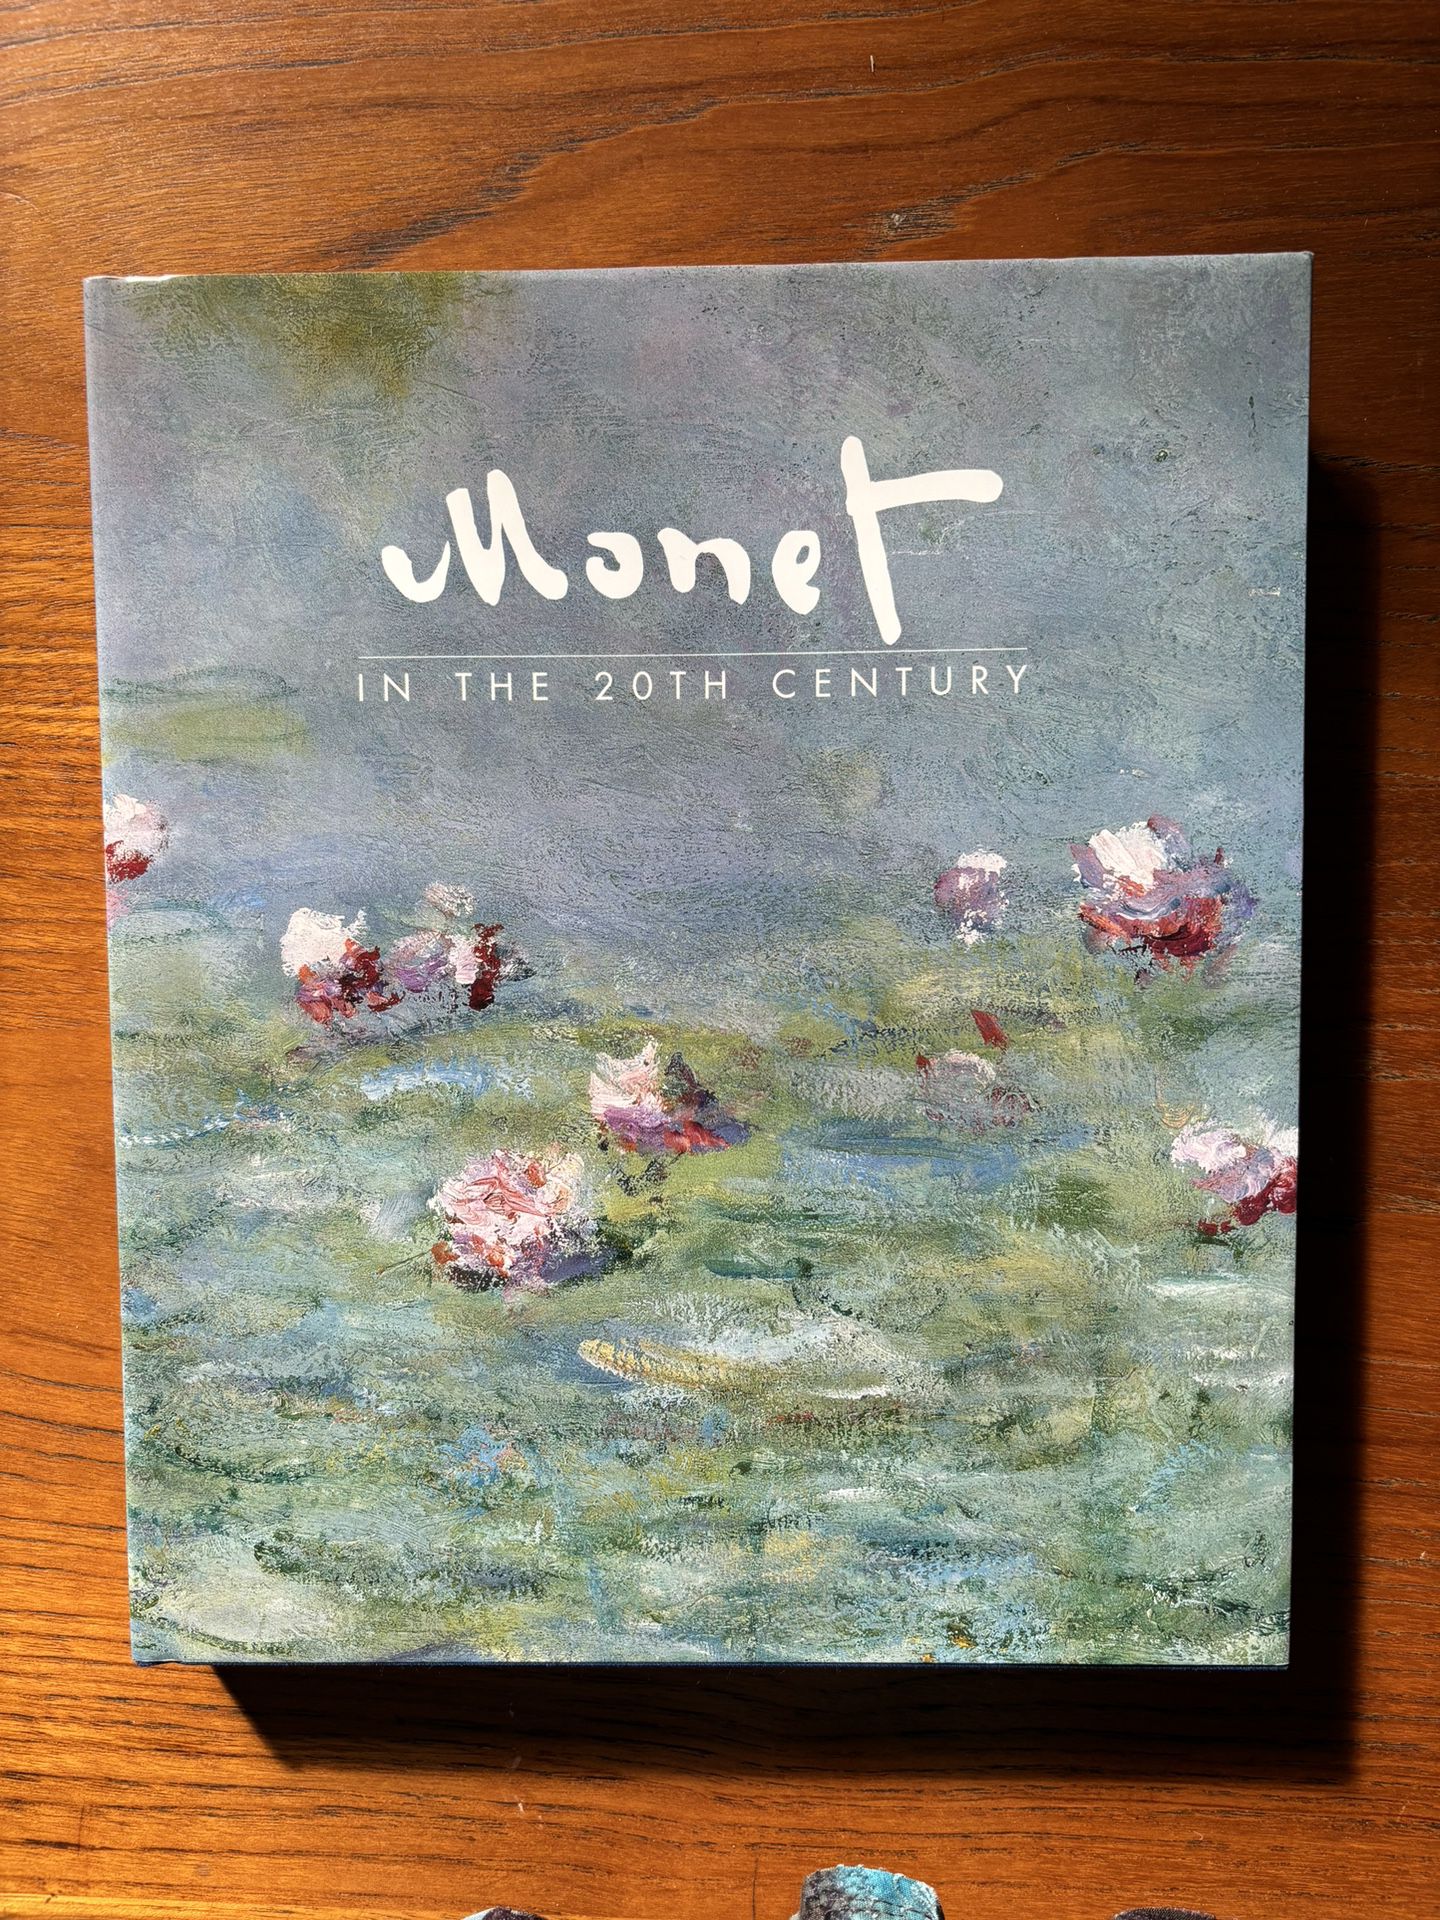 Monet in the 20th Century First Edition Hardcover with dust Jacket by Paul Hayes Tucker, George T.M. Shackelford, Maryanne Steven’s